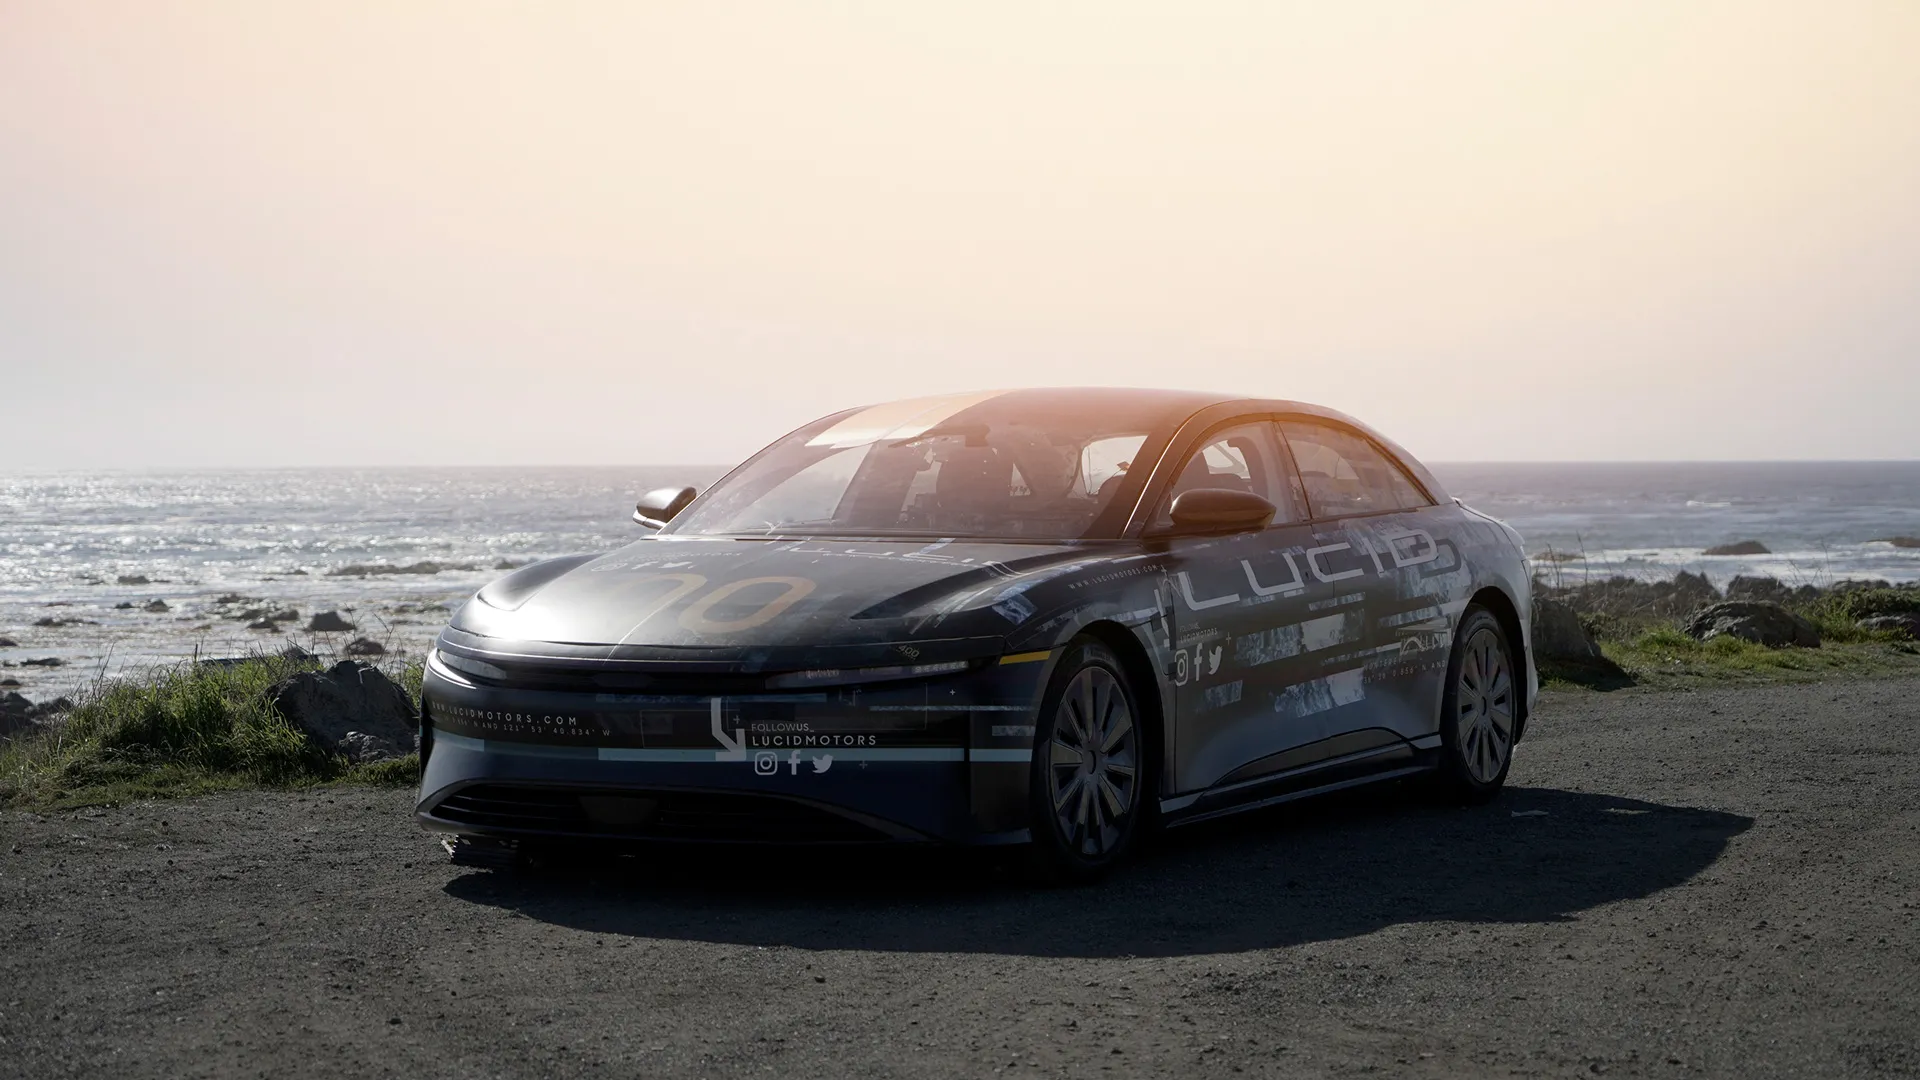 the Lucid Air by the sea